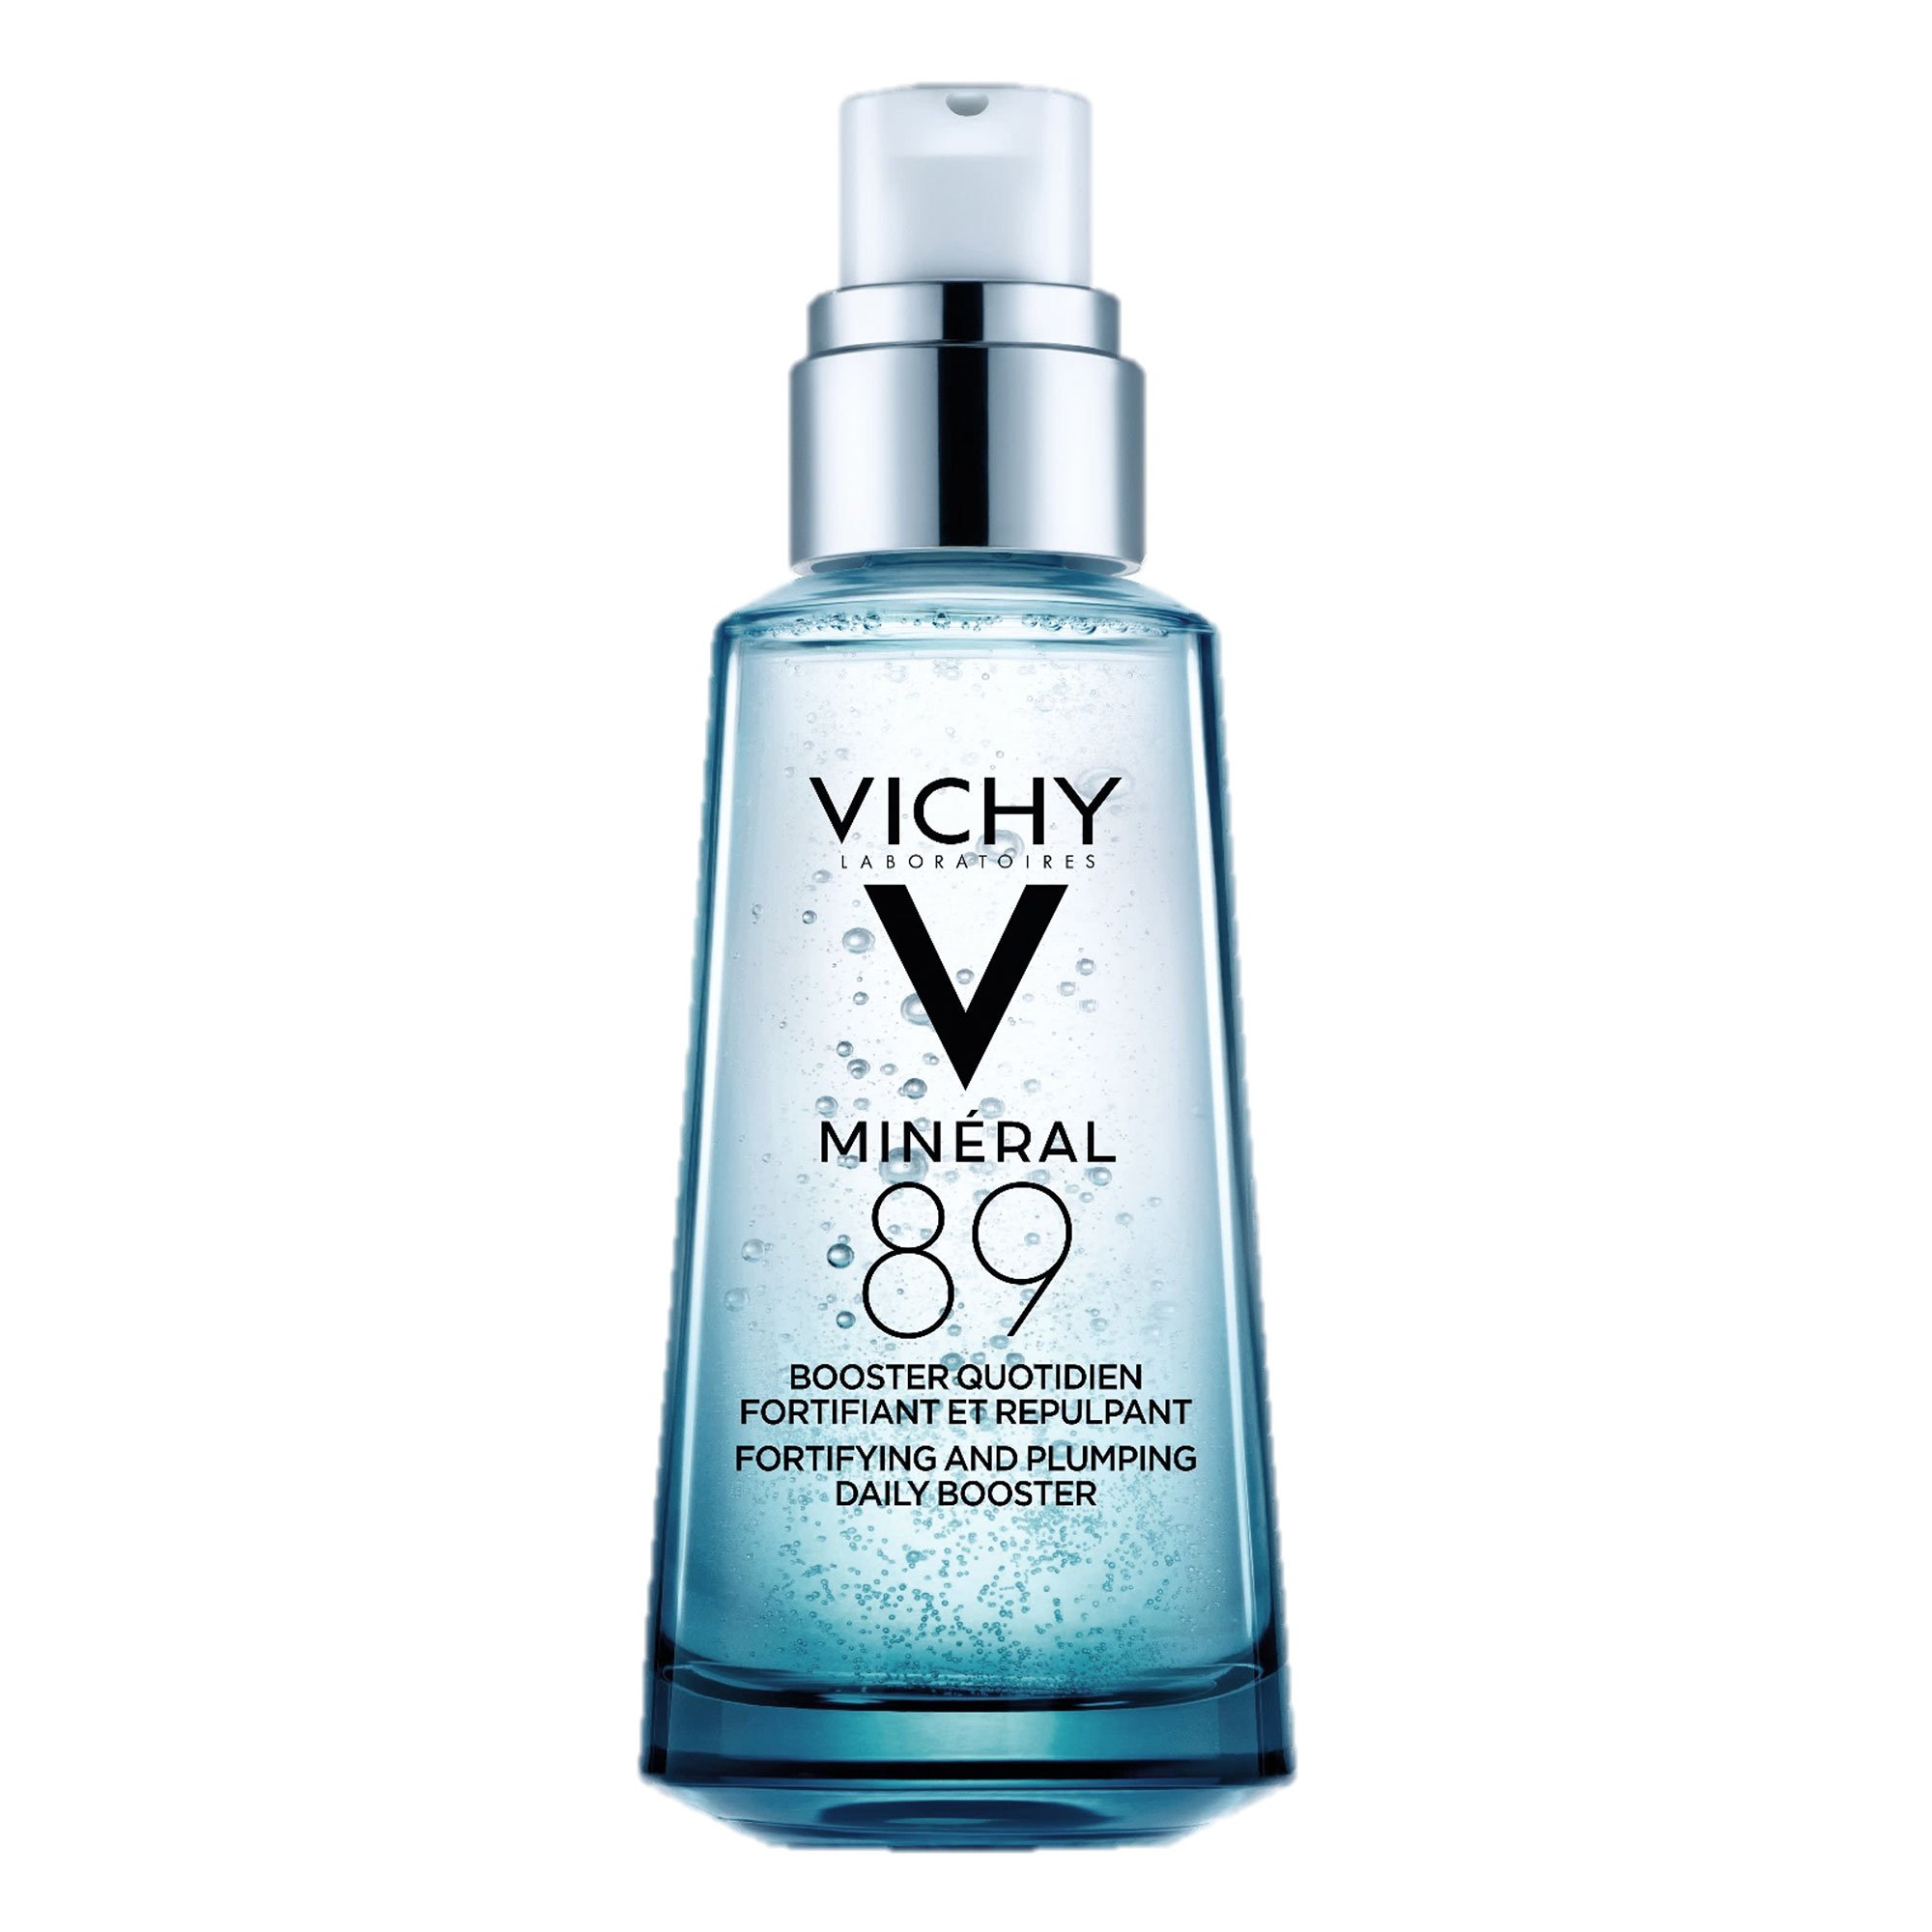 Vichy Laboratoires Mineral 89 Hyaluronic Acid Skin Booster